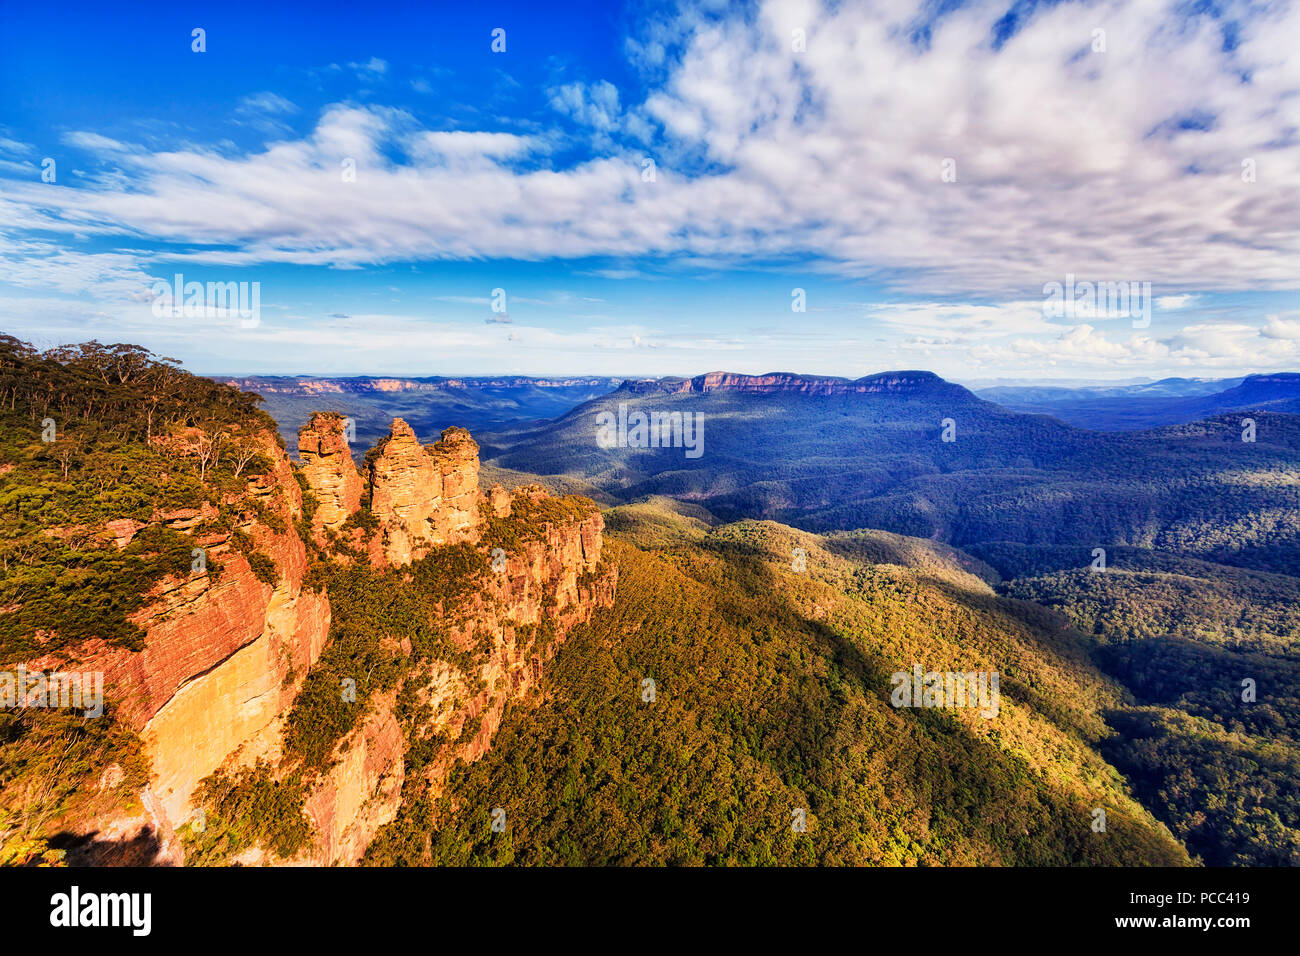 Three sisters rock cliffs natural landmark with Mt Solitude in a distance over massive valley seen from Echo point lookout at Katoomba town - Blue Mou Stock Photo